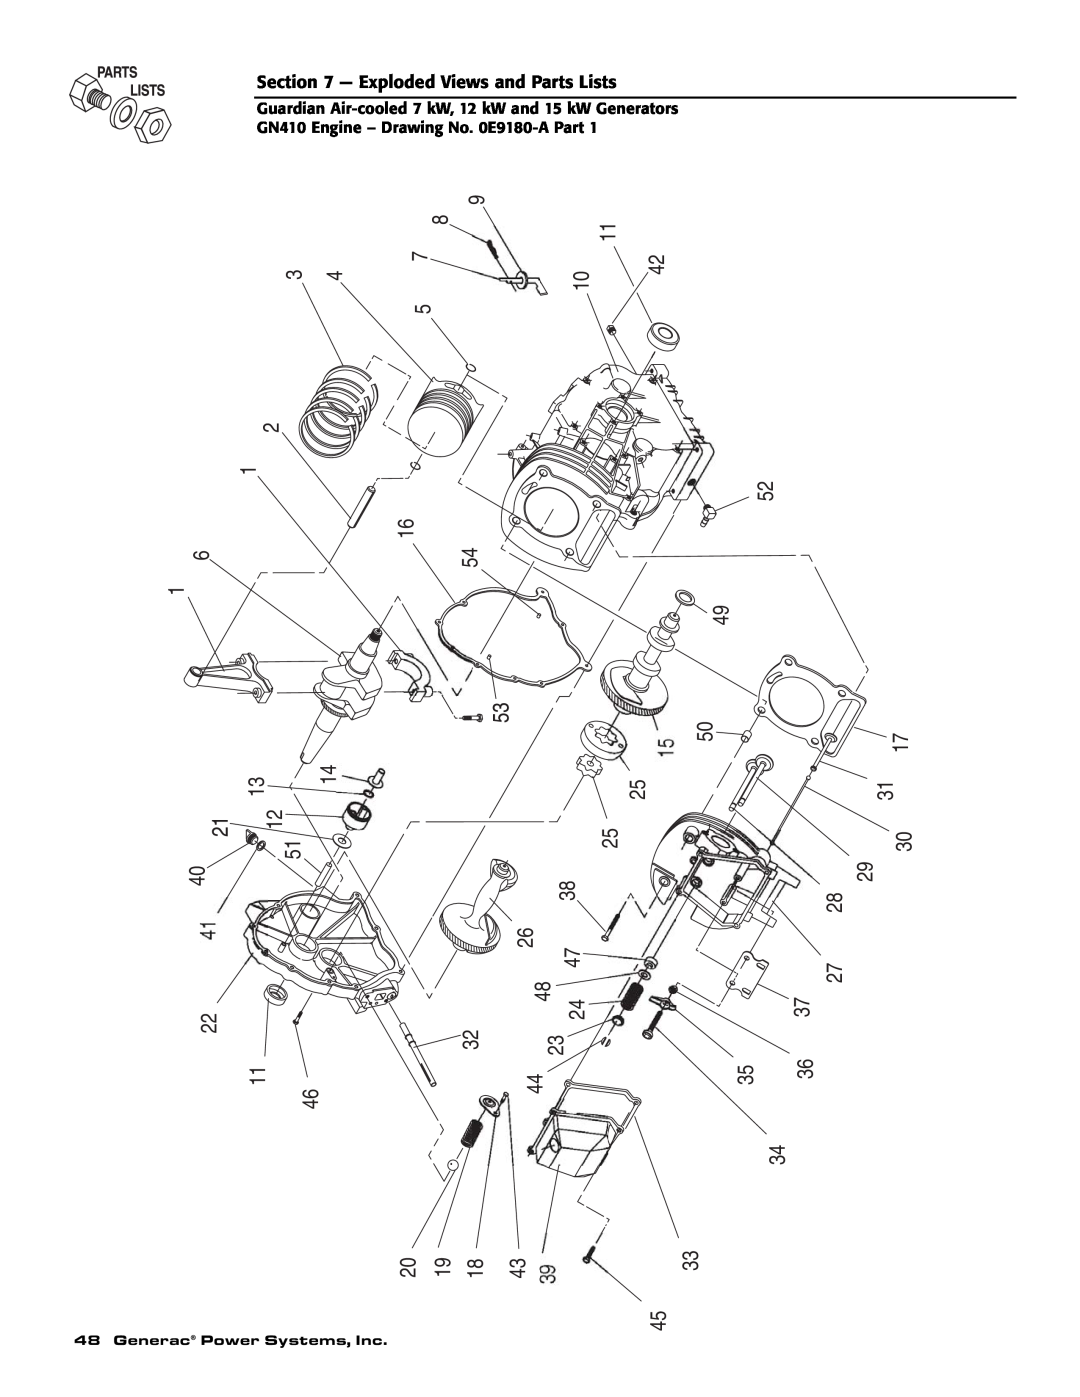 Guardian Technologies 04390-2, 04389-2, 04456-2 owner manual Exploded Views and Parts Lists, Generac Power Systems, Inc 